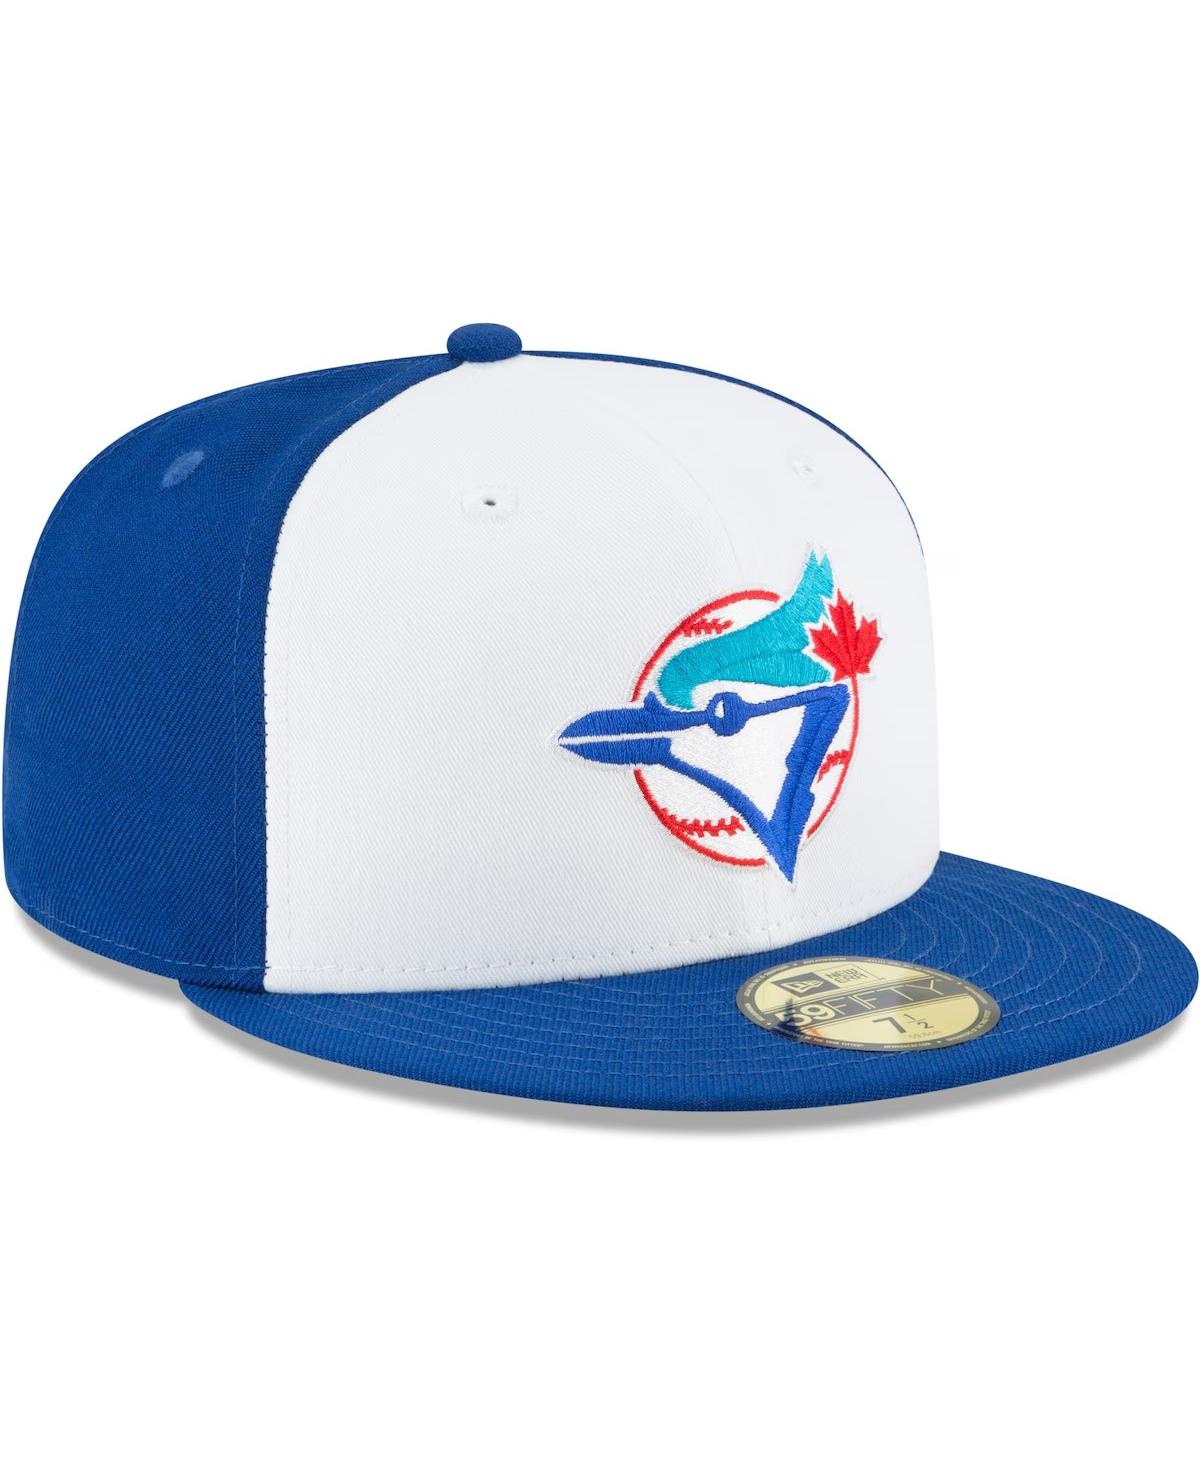 Men's White Toronto Blue Jays Cooperstown Collection Wool 59FIFTY Fitted Hat - Blue